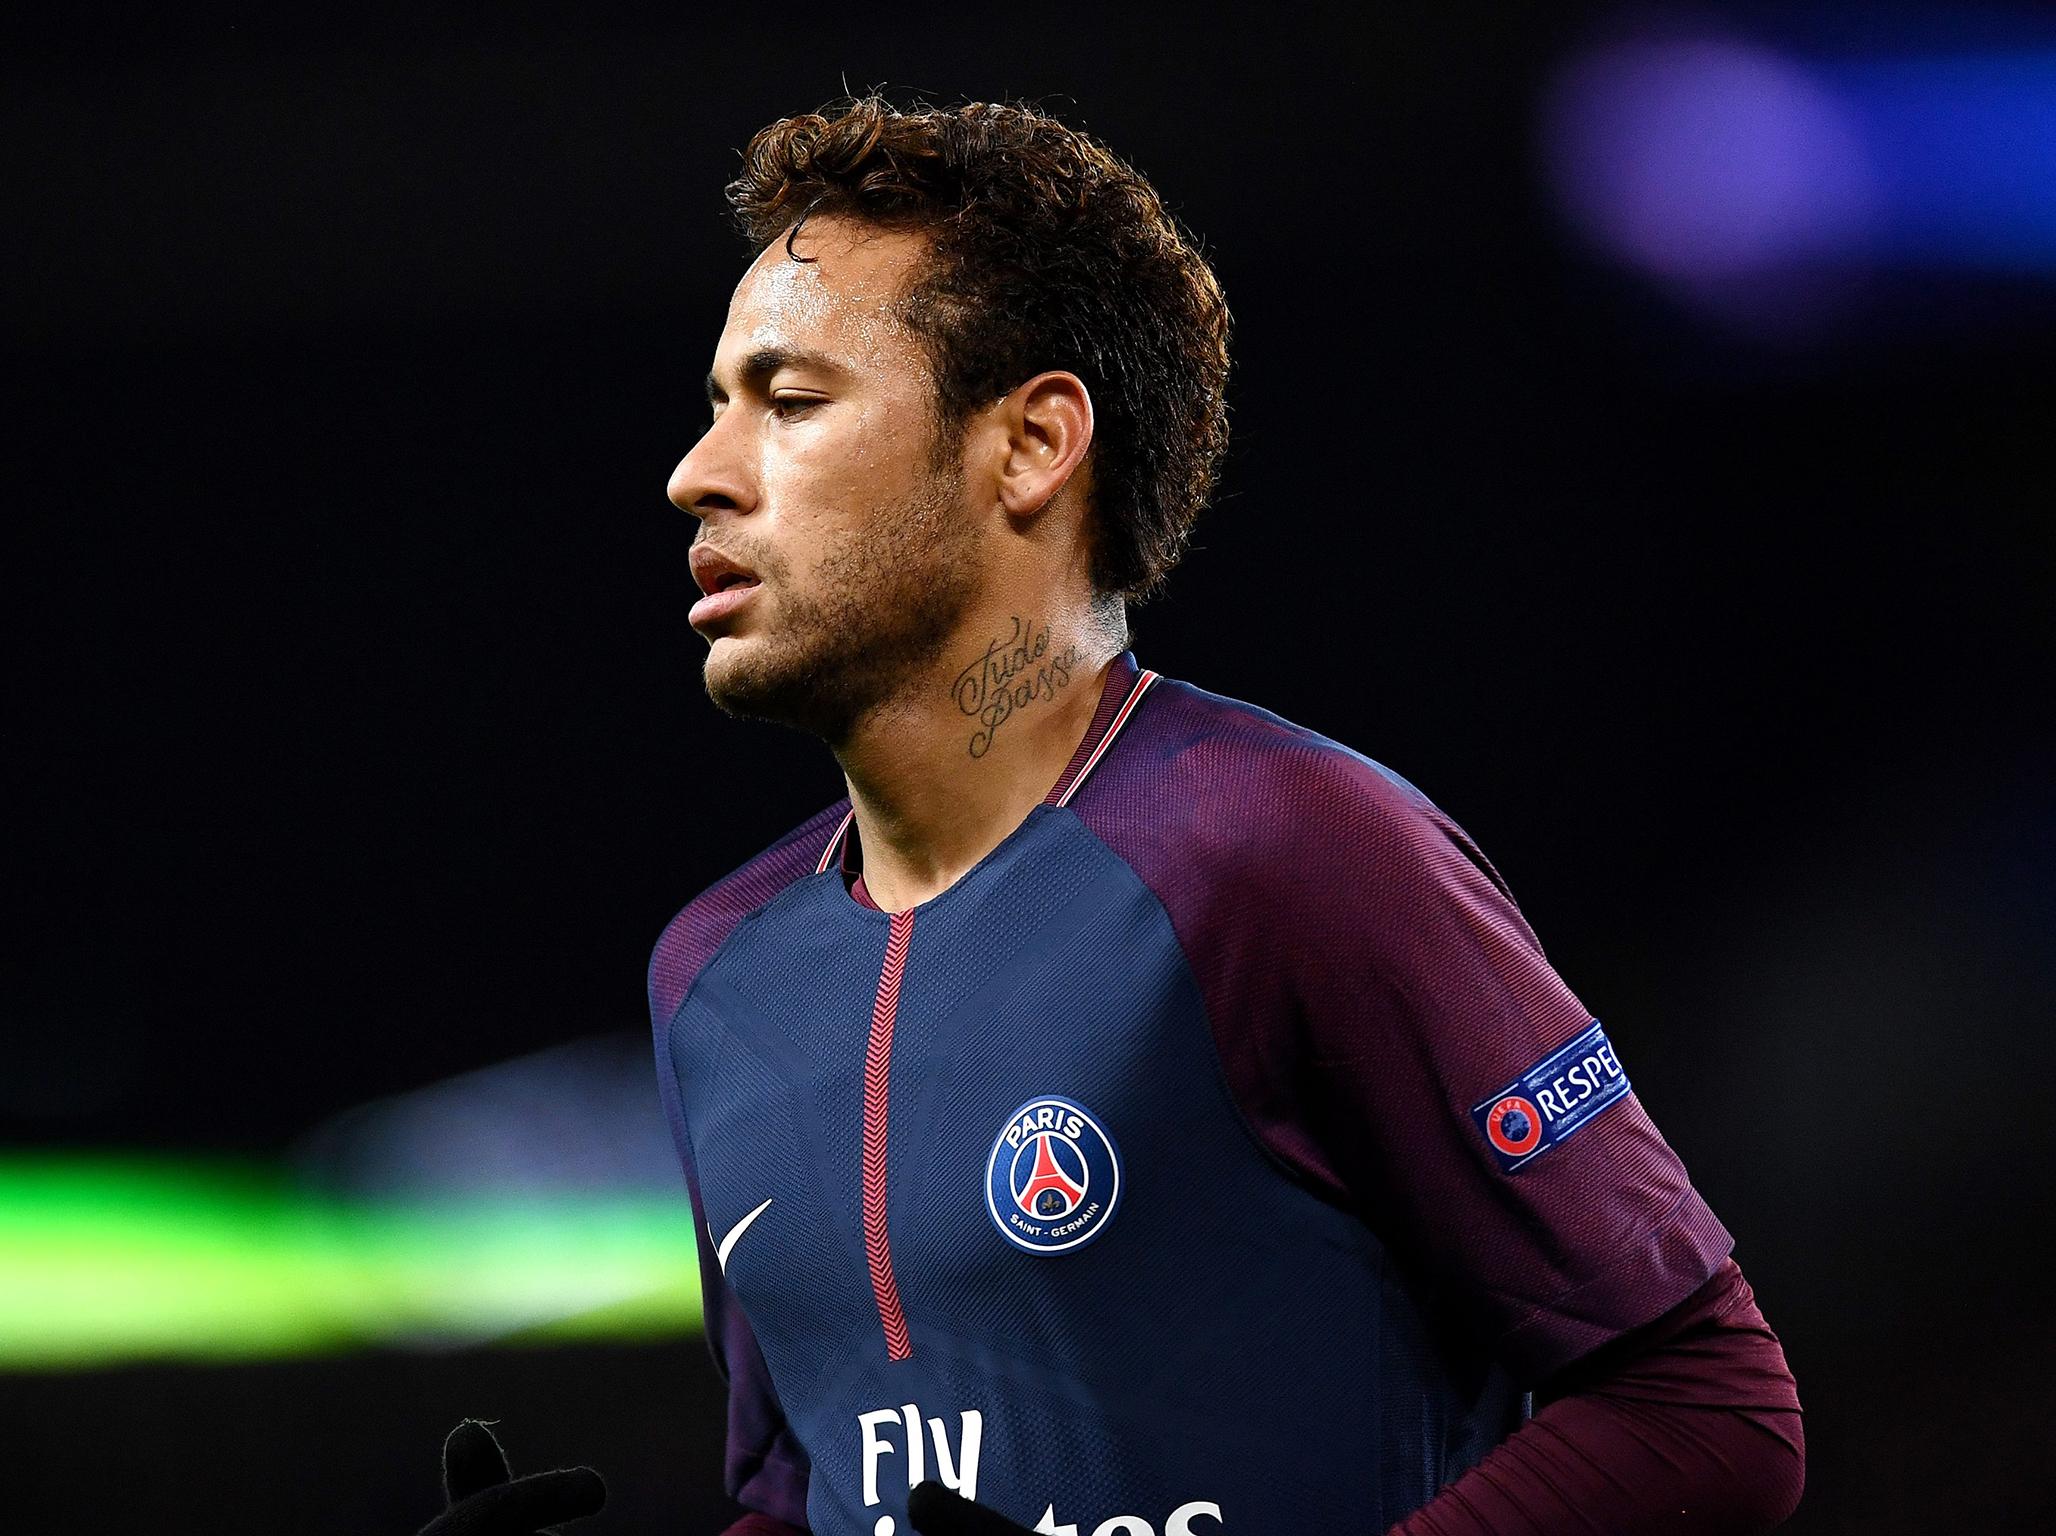 Neymar's future casts a shadow over the round of 16 glamour tie